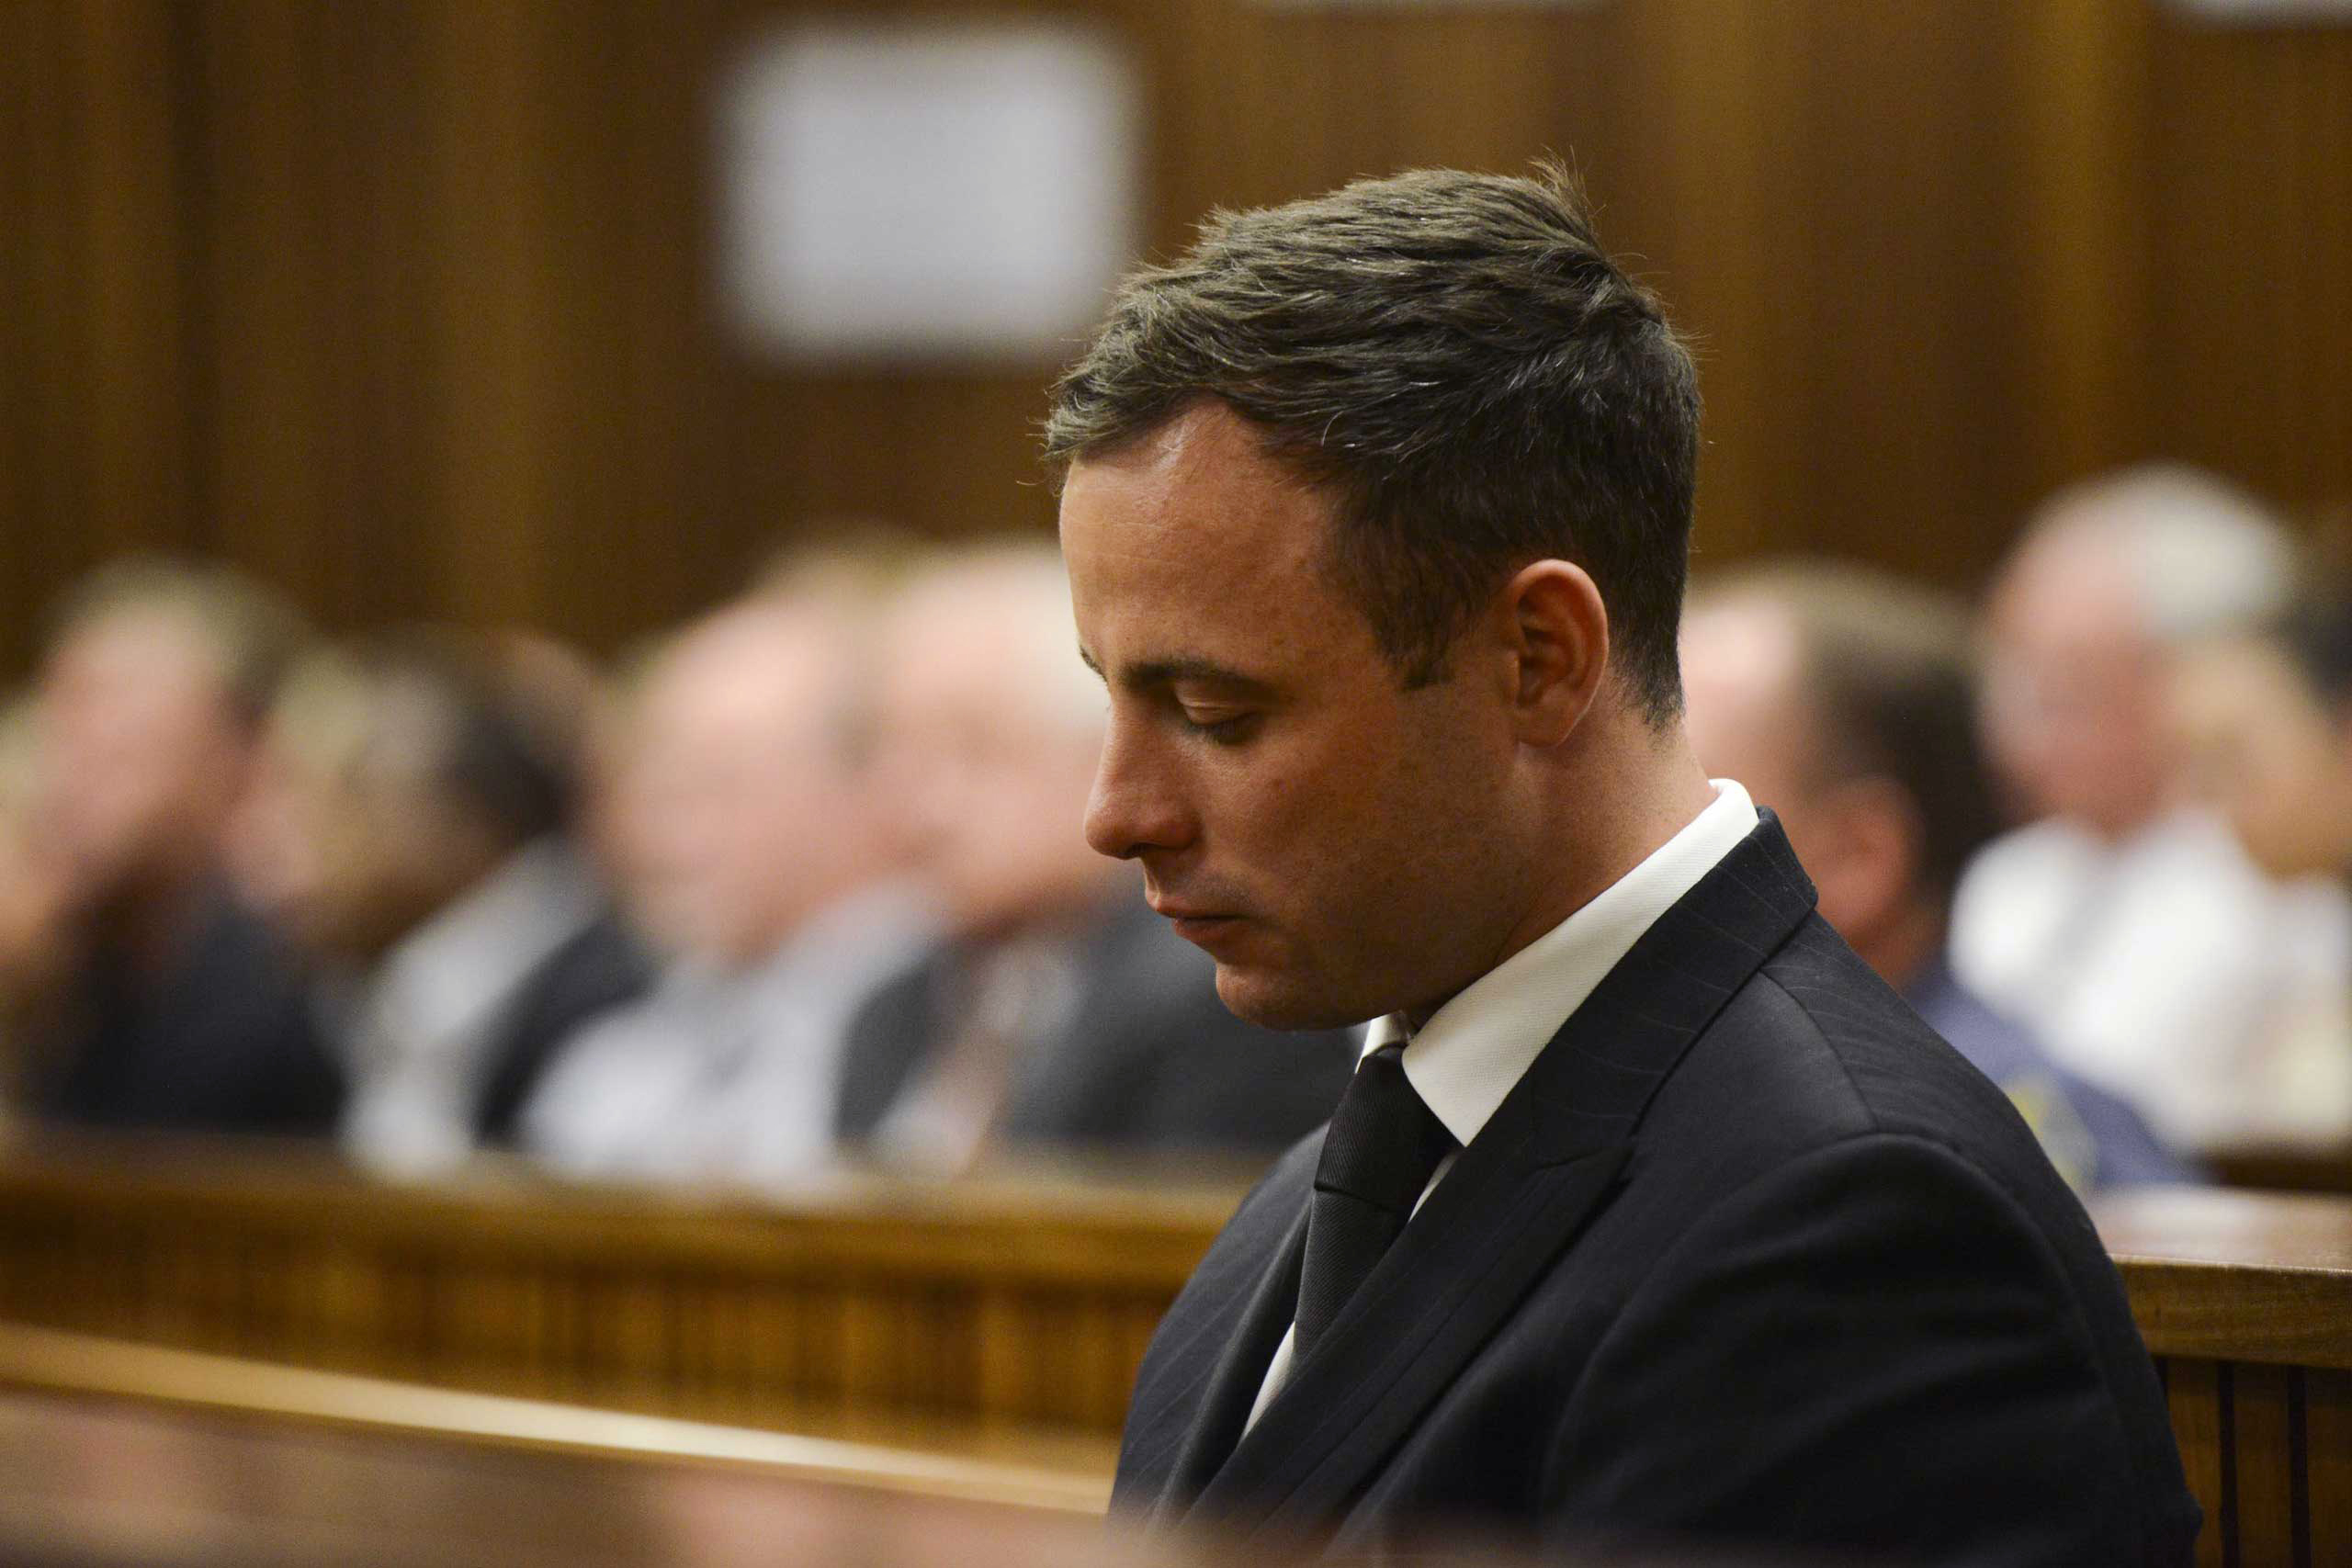 Oscar Pistorius after he is sentenced at the Pretoria High Court on October 21, 2014, in Pretoria, South Africa. (Herman Verwey&amp;mdash;Getty Images)